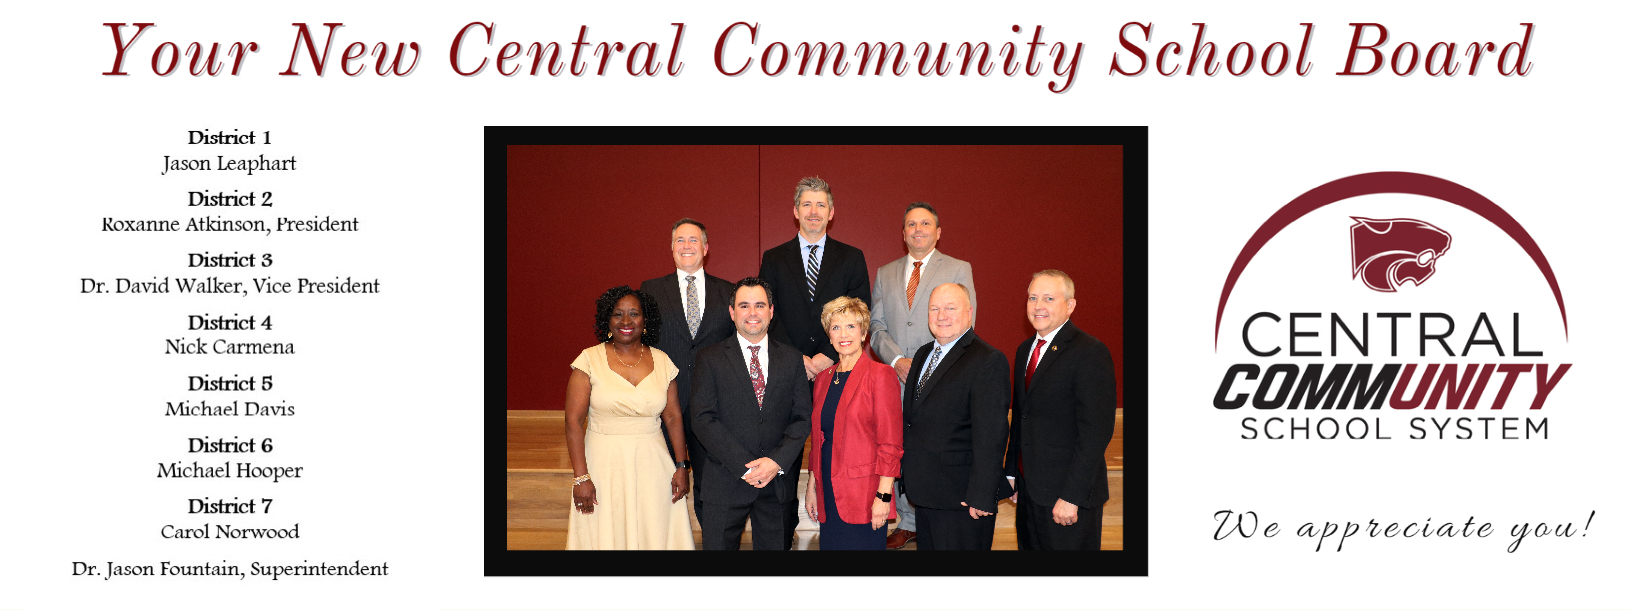 Your New Central Community  School Board!  We appreciate you!  District 1-  Jason Leaphart   District 2 - Roxanne Atkinson, President  District 3 -  Dr. David Walker, Vice President   District 4 - Nick Carmena   District 5 - Michael Davis   District 6 - Michael Hooper   District 7 - Carol Norwood  Dr. Jason Fountain, Superintendent